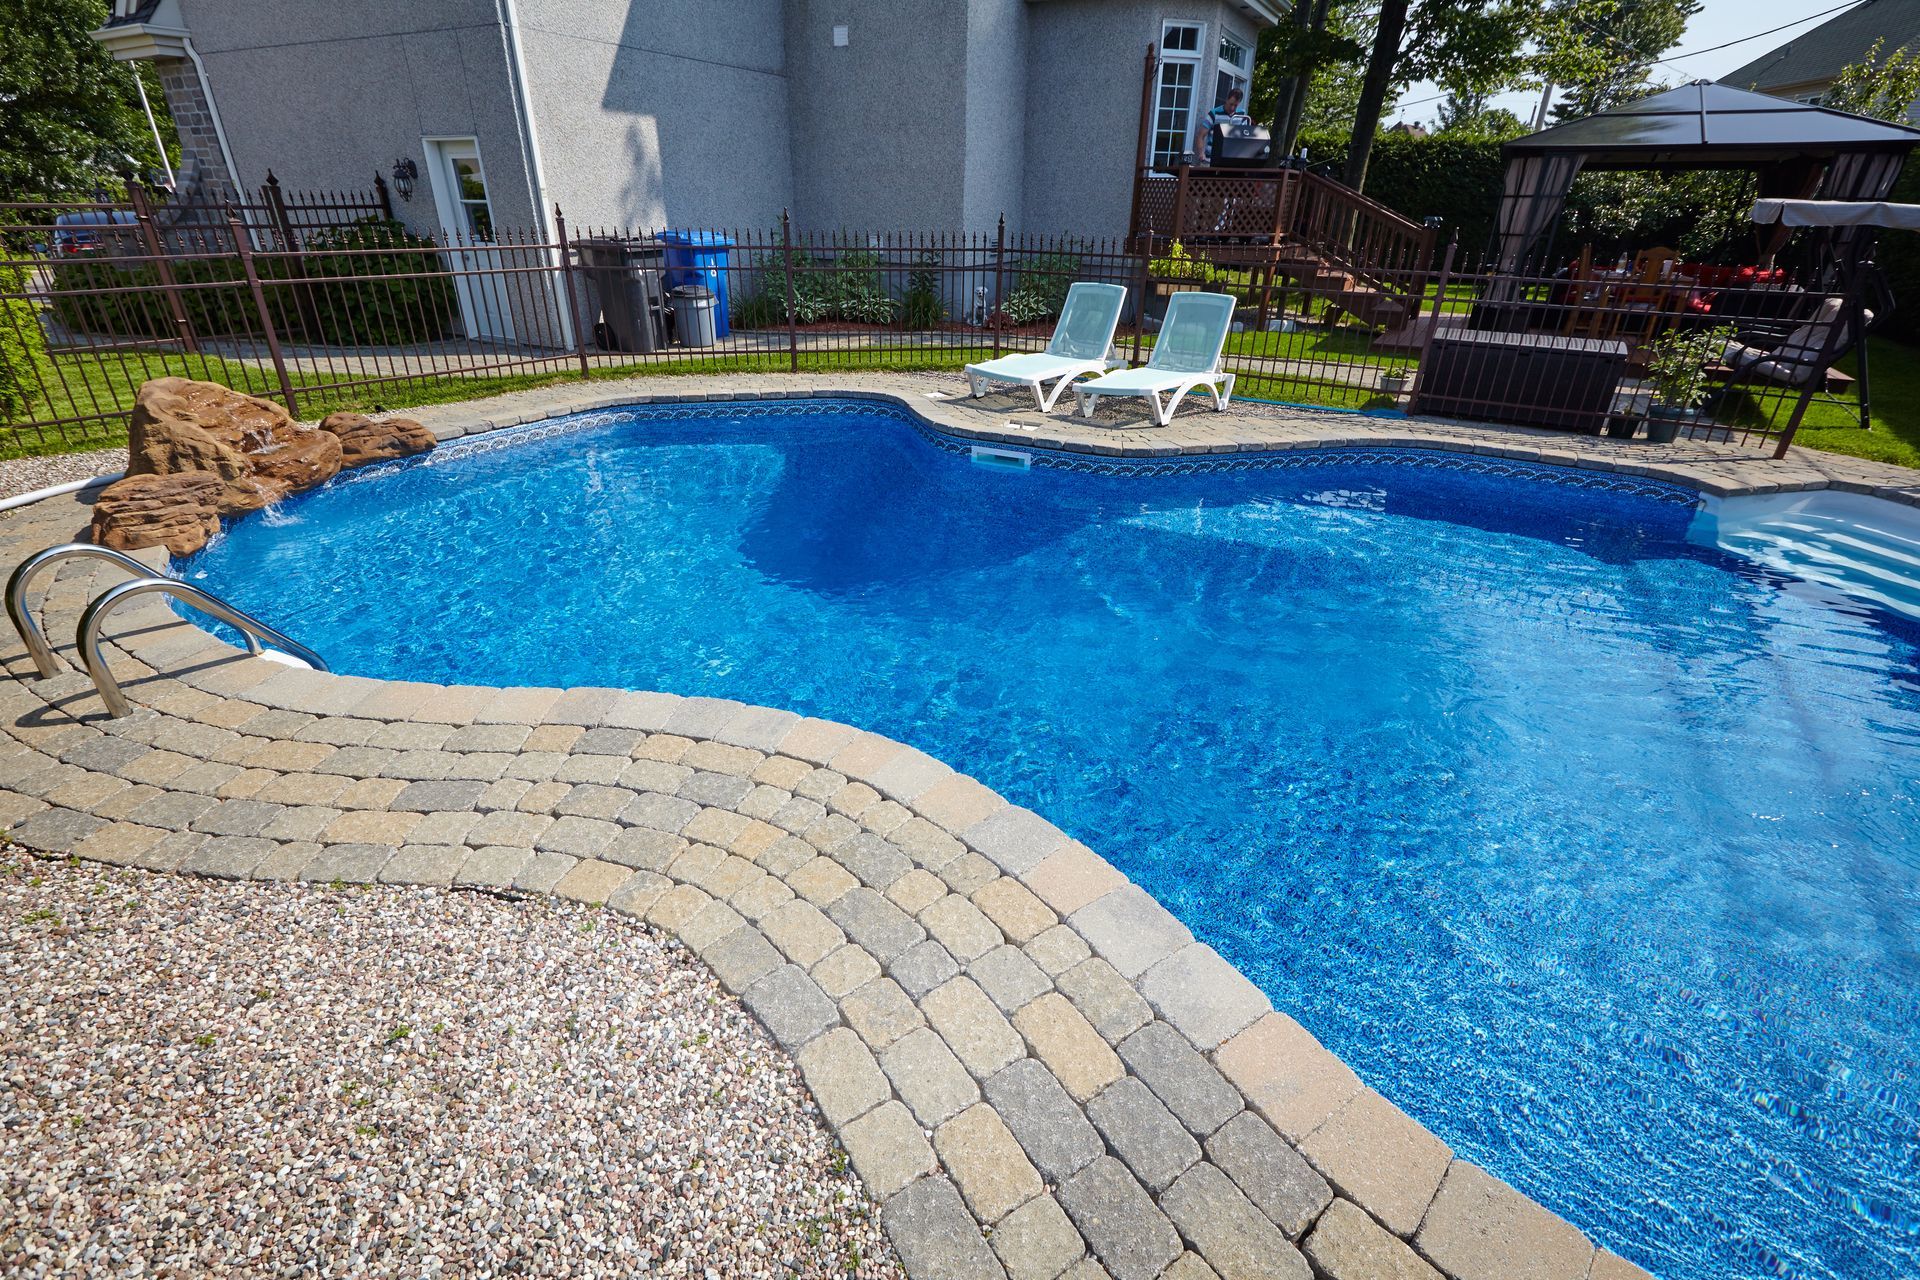 vinyl liner pool in the backyard with a fountain feature